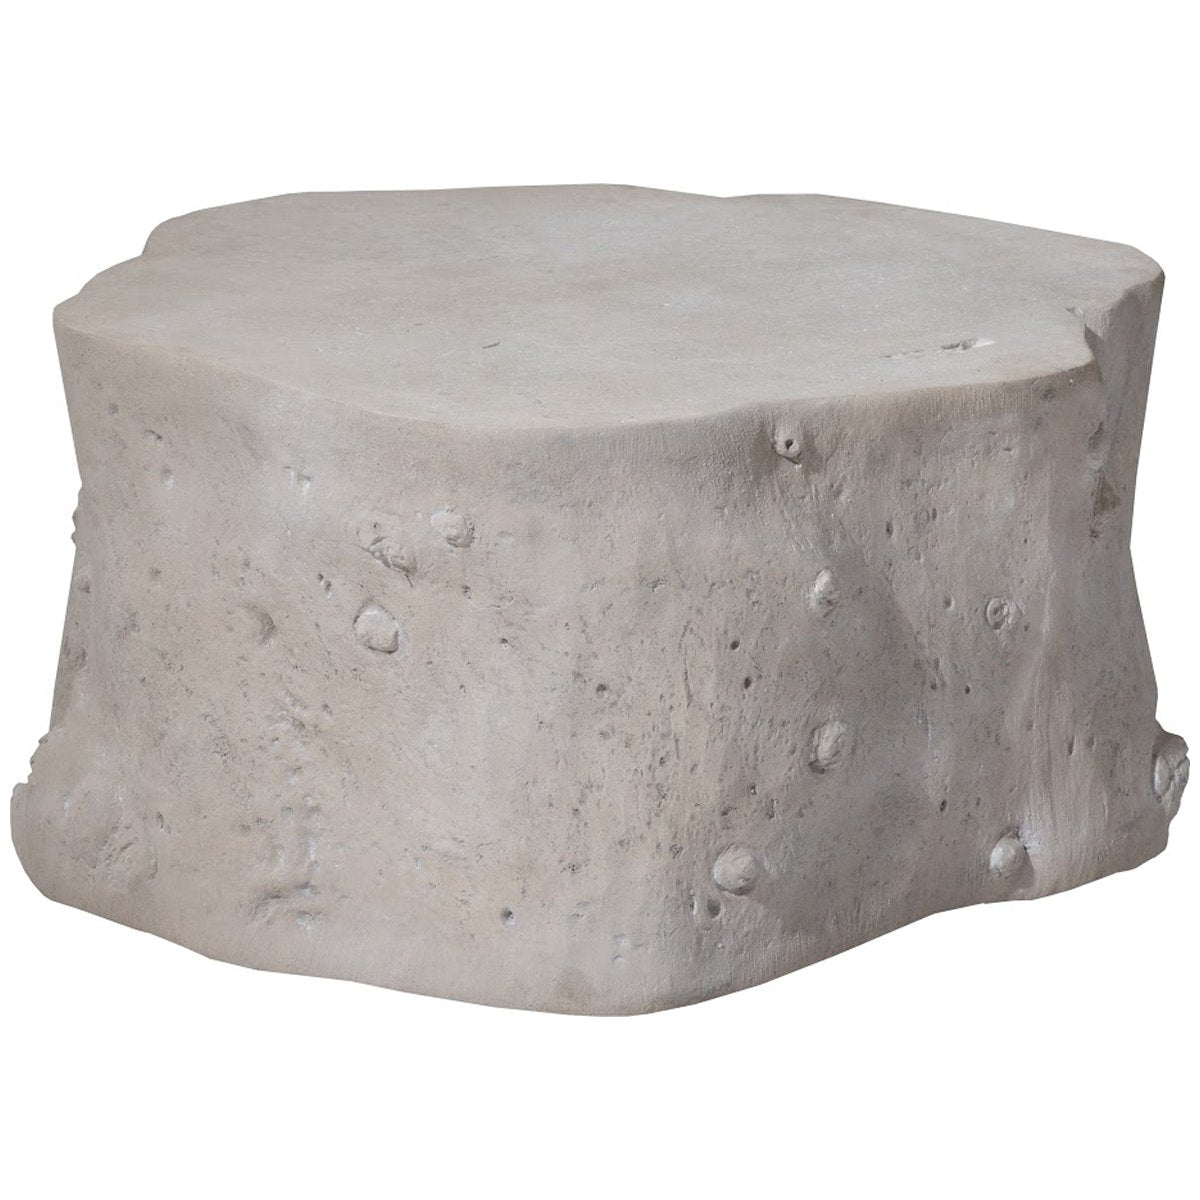 Phillips Collection Log Outdoor Coffee Table, Roman Stone